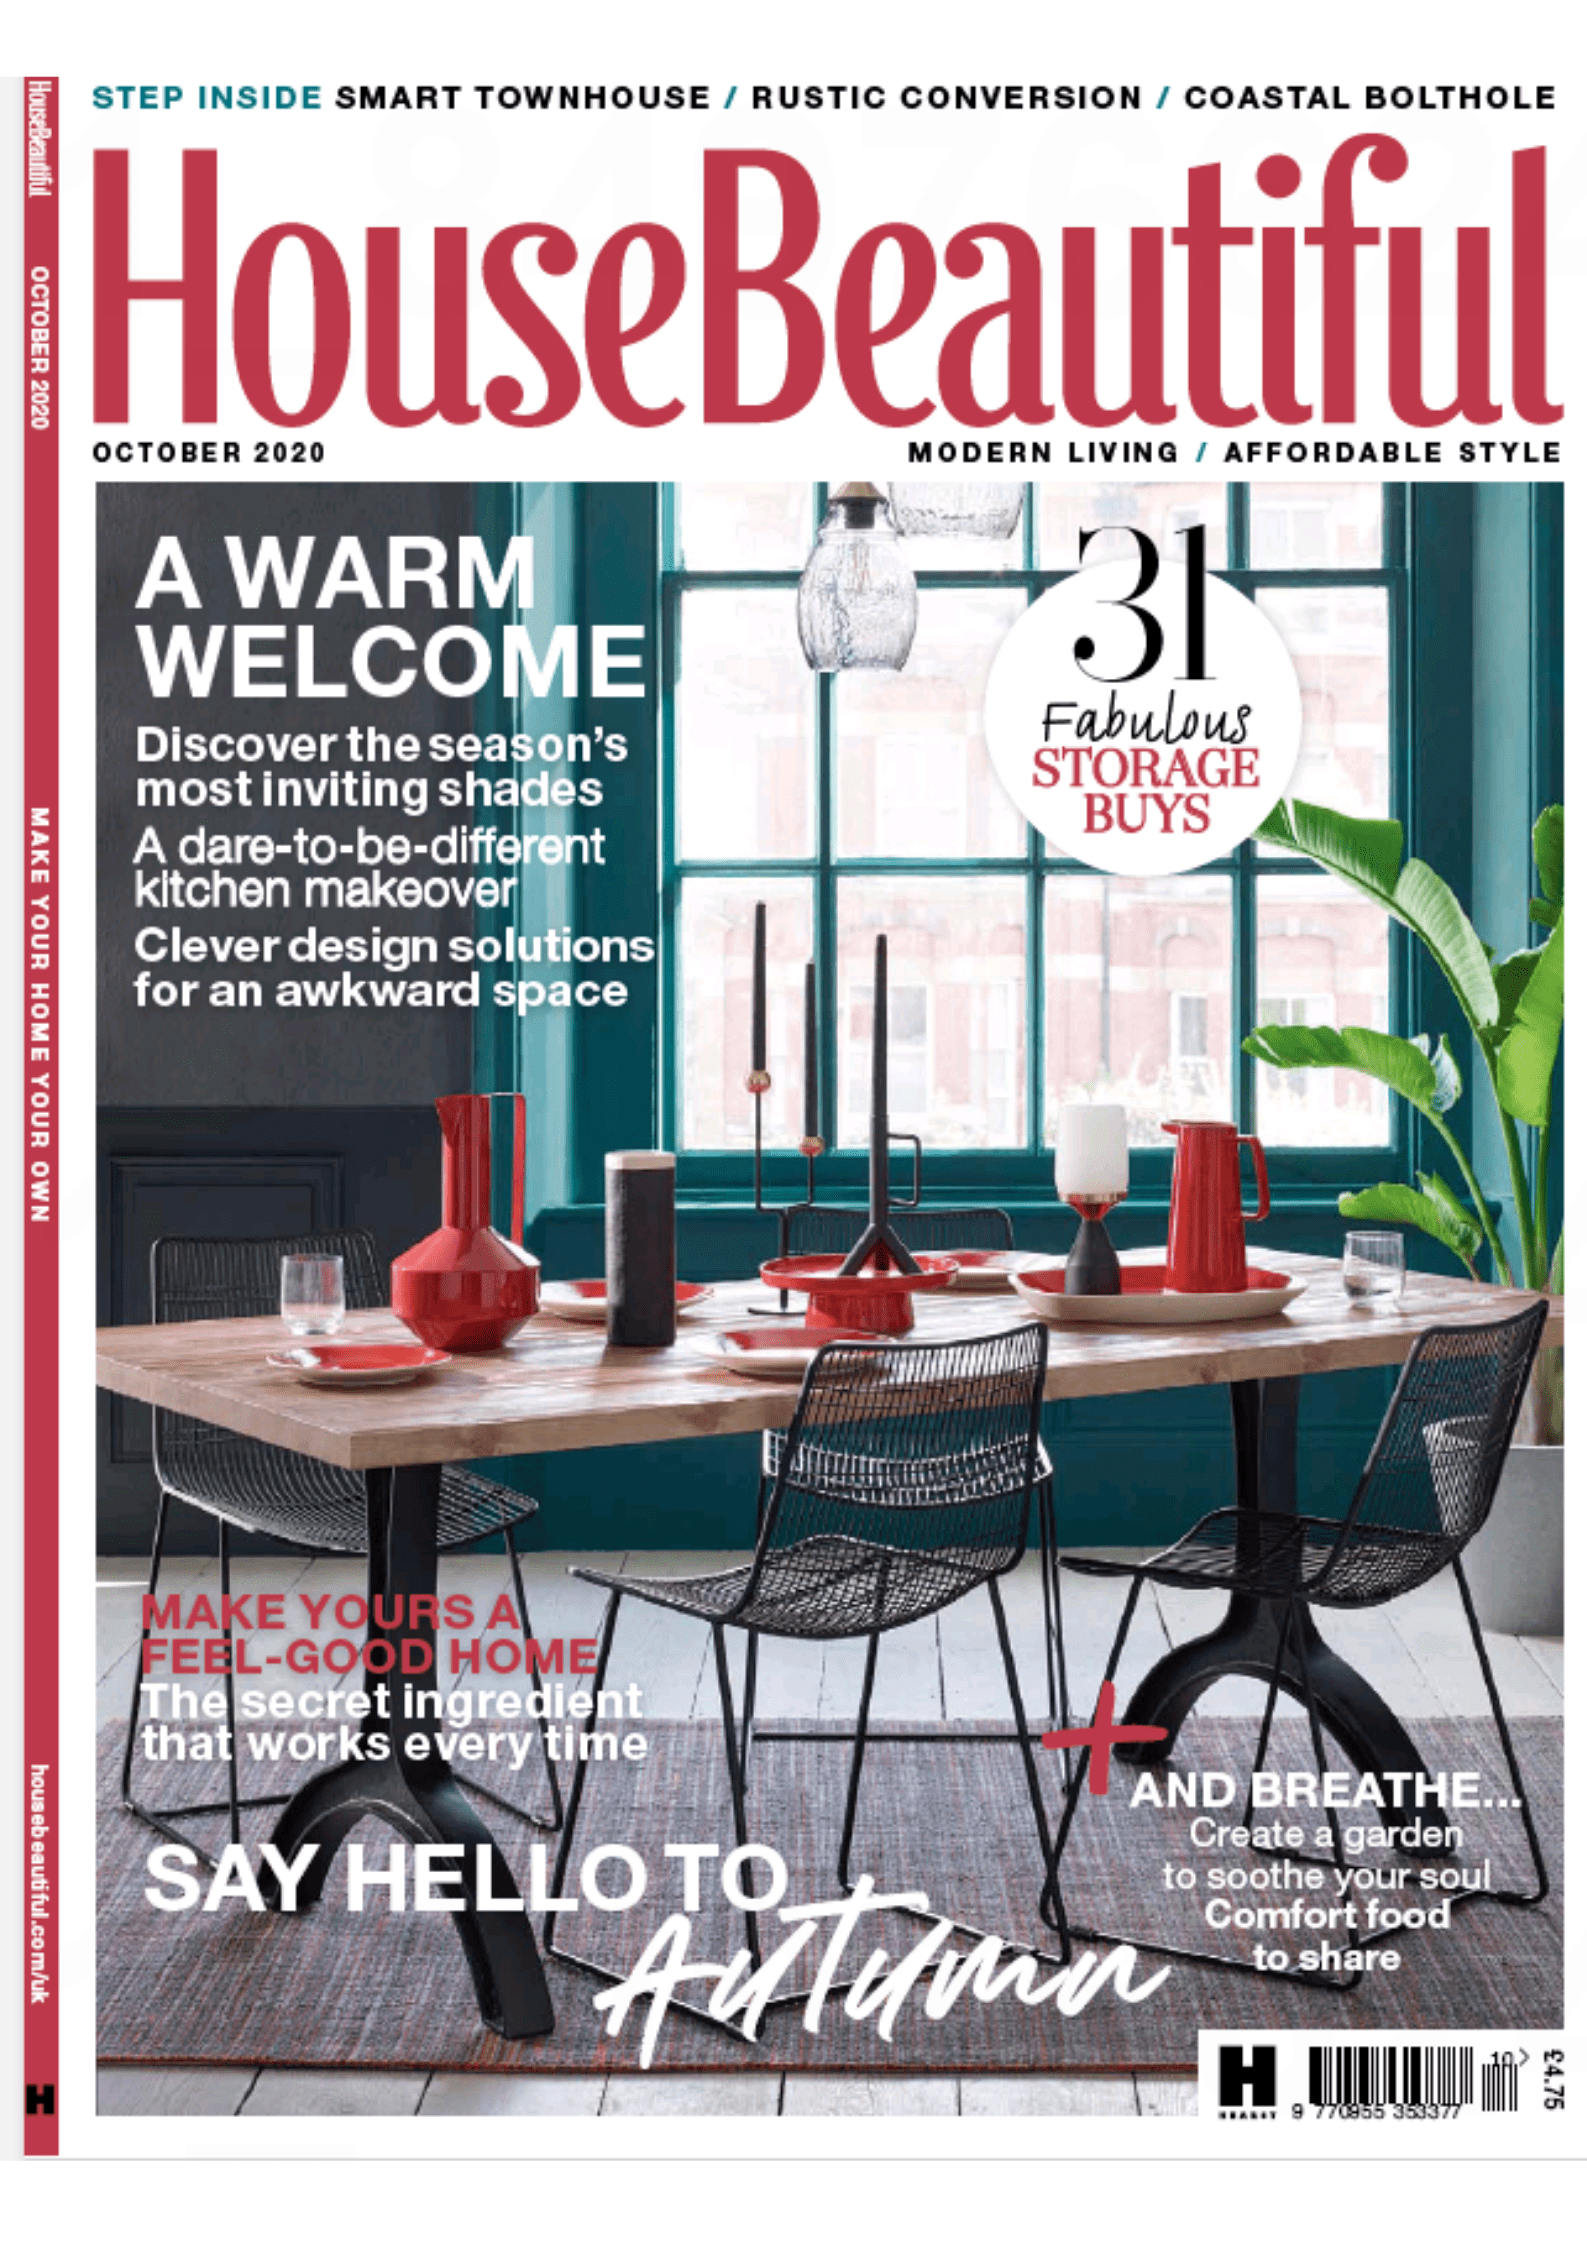 Most known interior design magazines - house beautiful